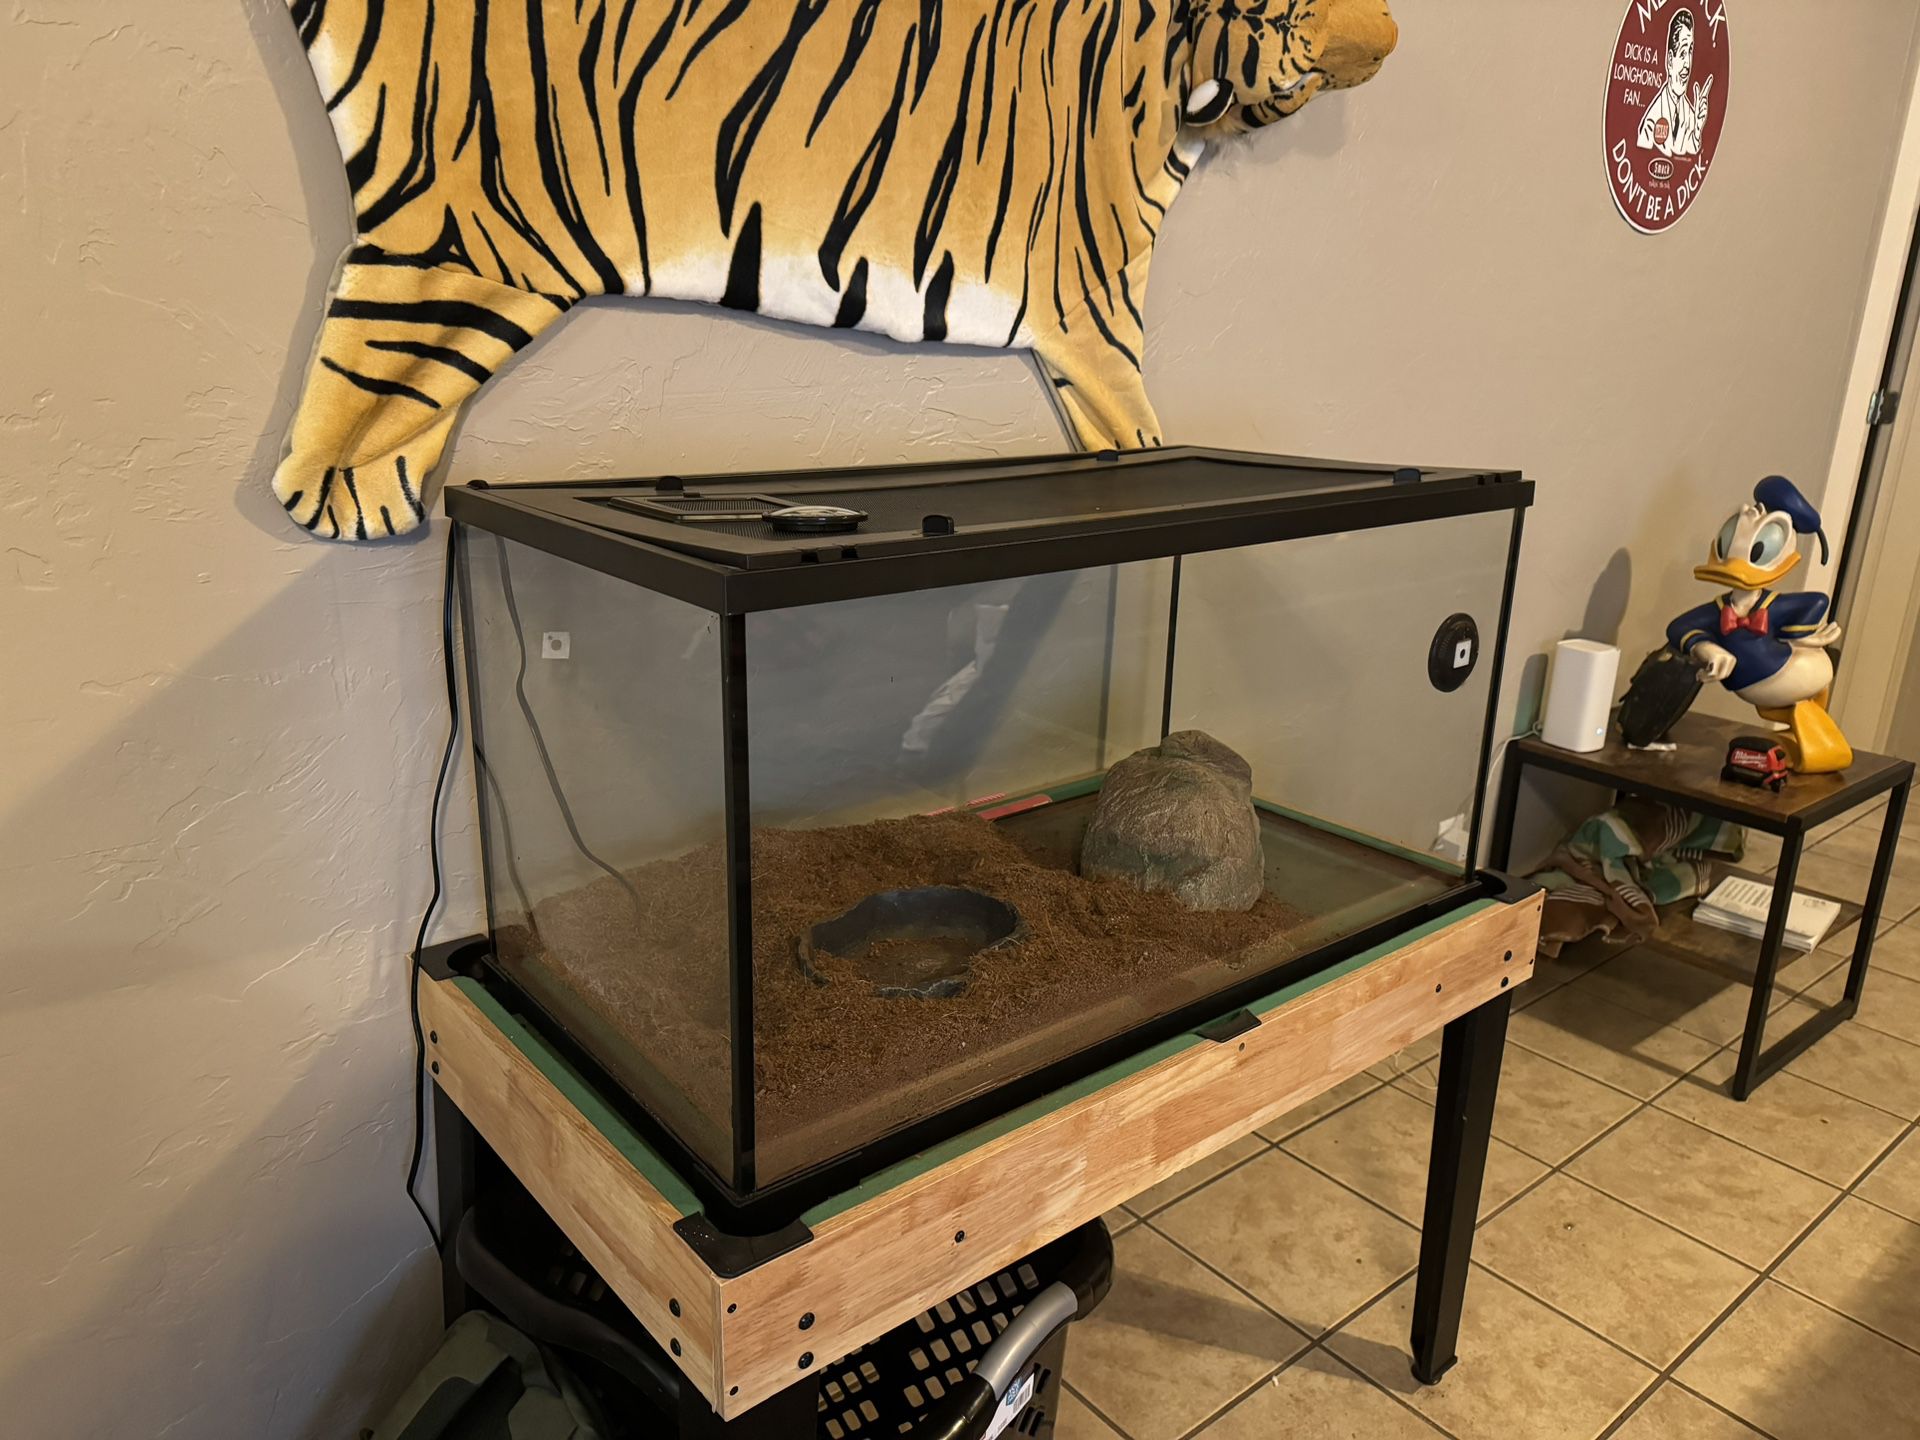 Terrarium For Sale - Includes Water Bowl, Structure, And Heat Lamp Fixture